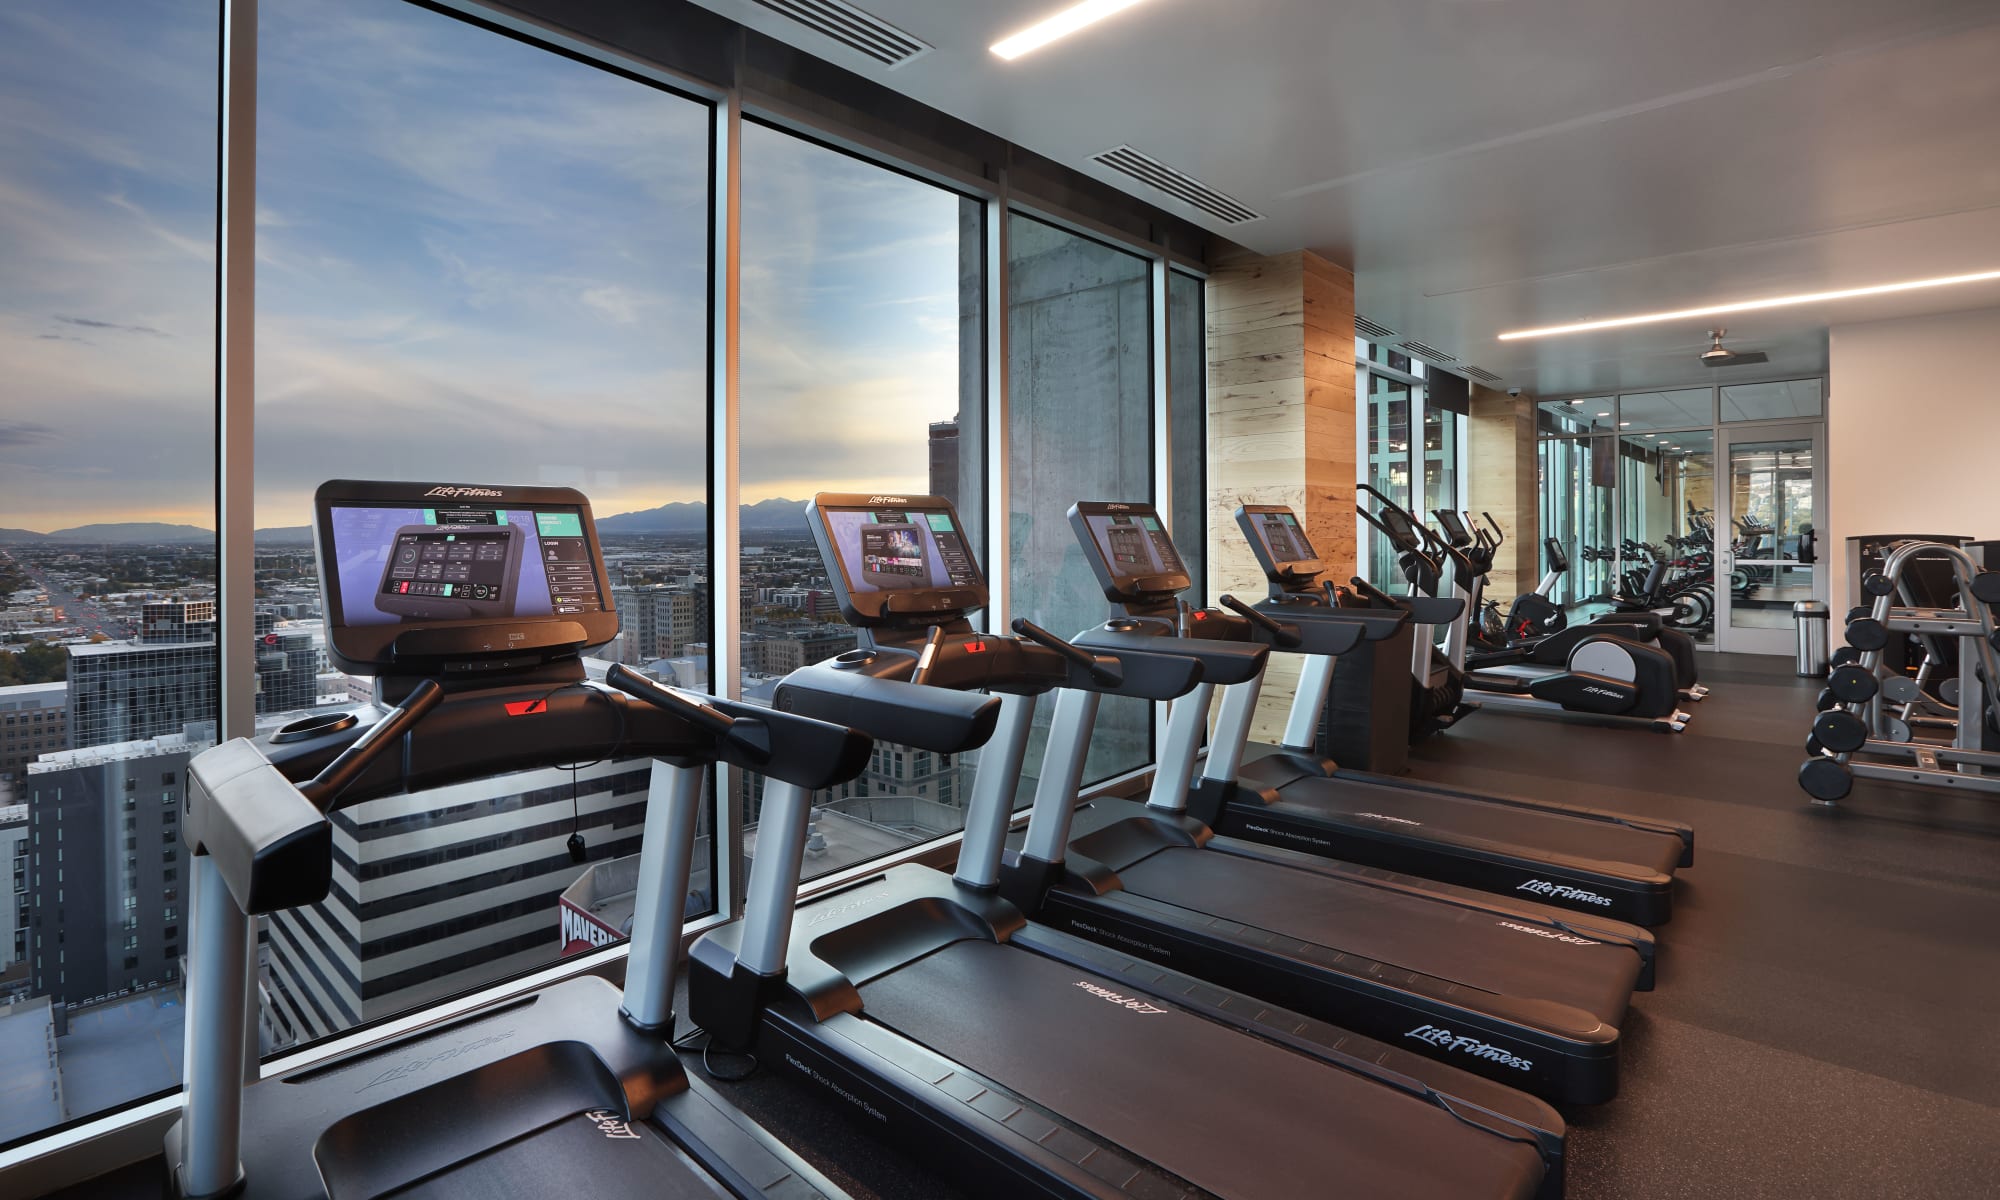 Treadmills and working equipment at gym on 21st floor at Luxury high-rise community of Liberty SKY in Salt Lake City, Utah